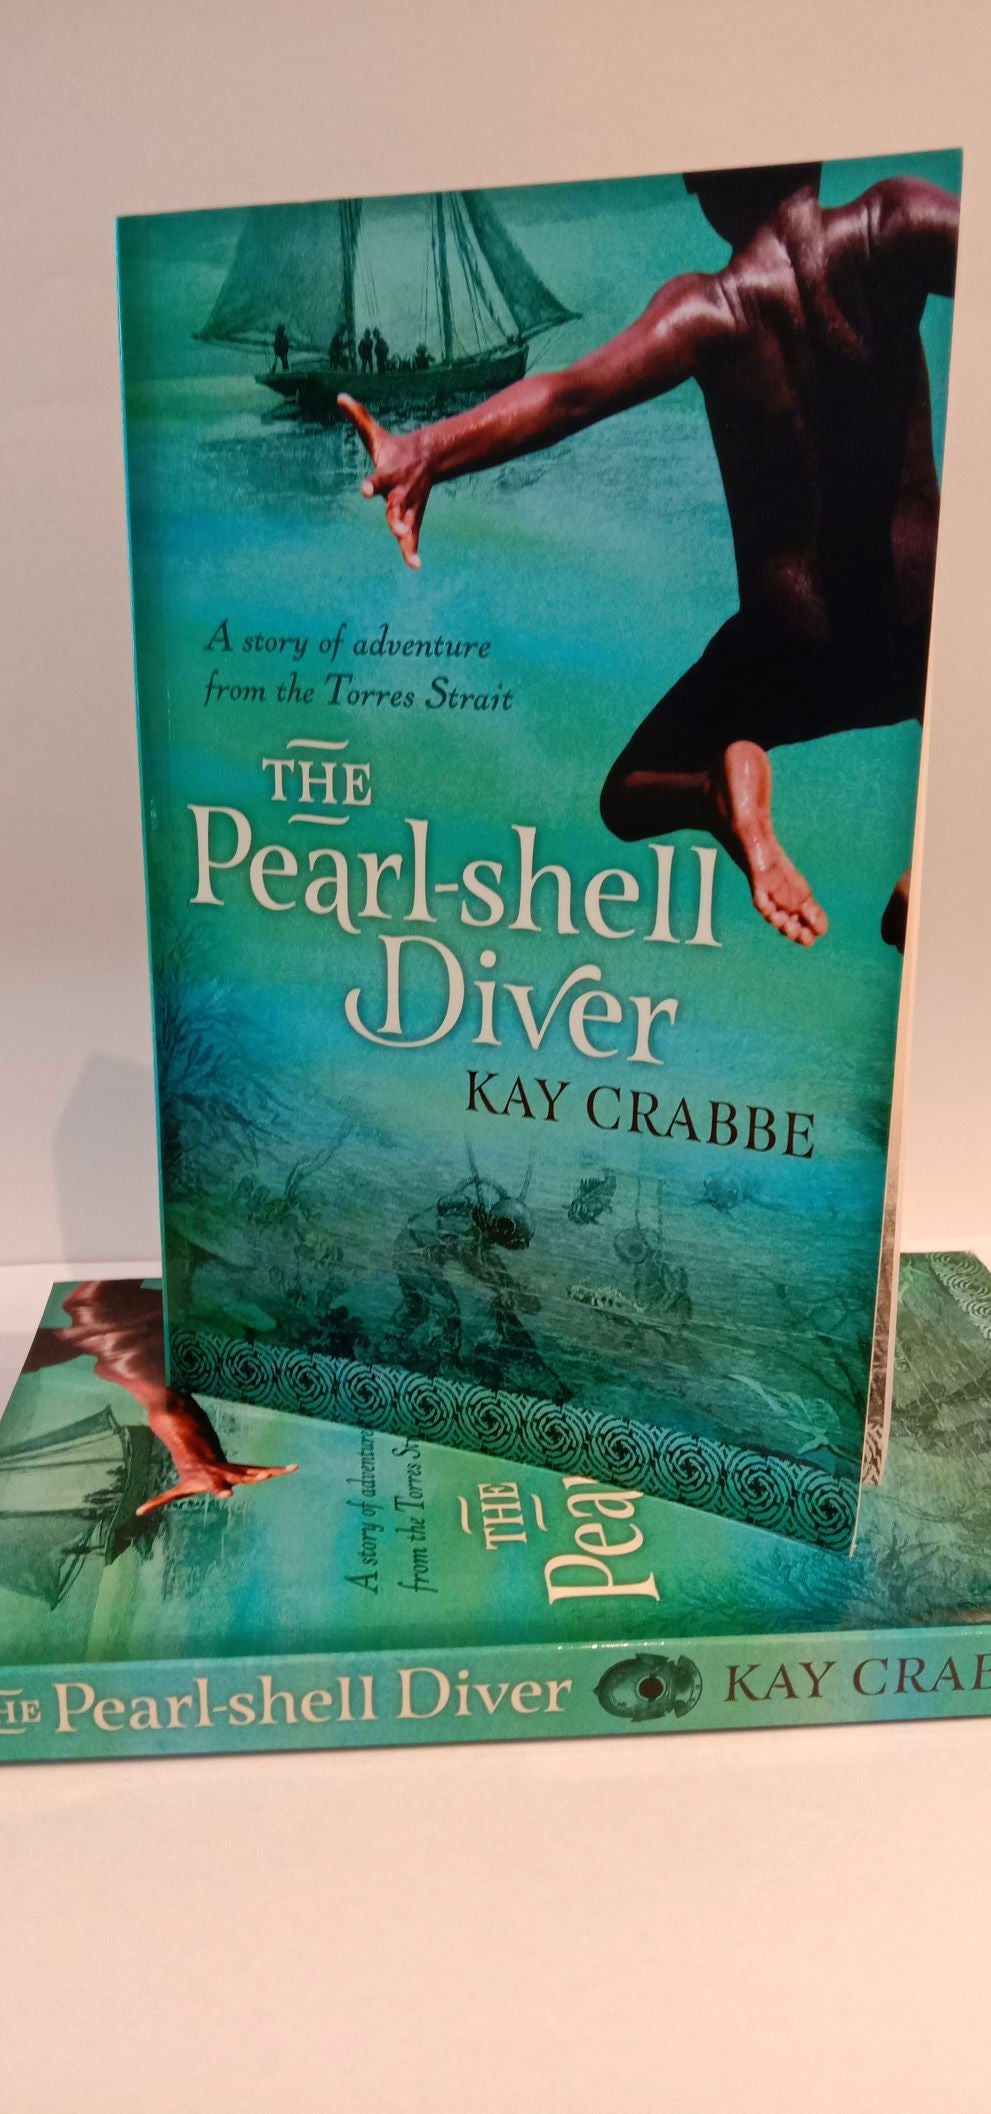 Book - The Pearl-shell Diver